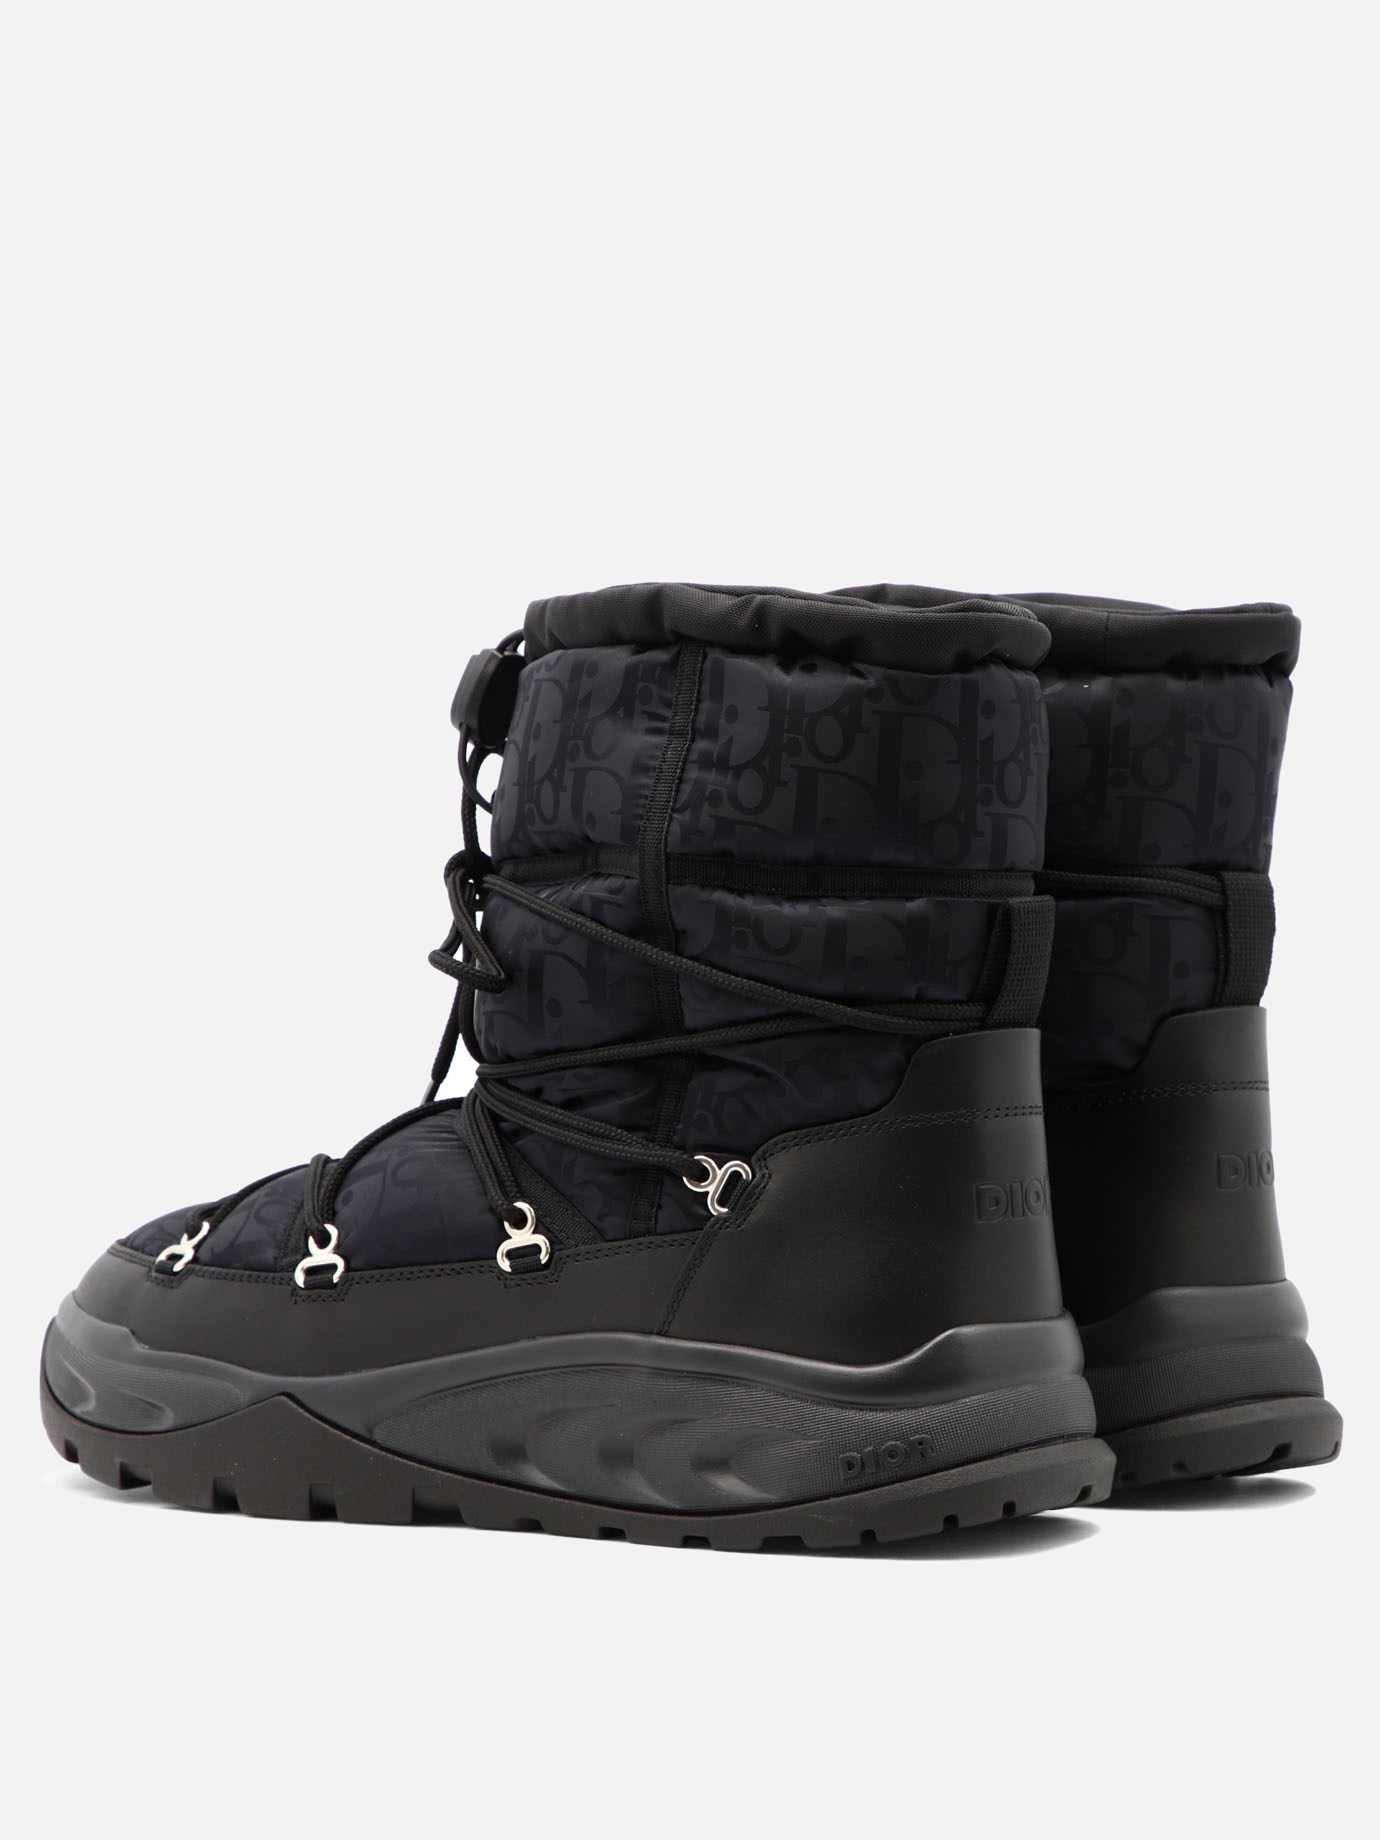  Dior Oblique  snow ankle boots by Dior